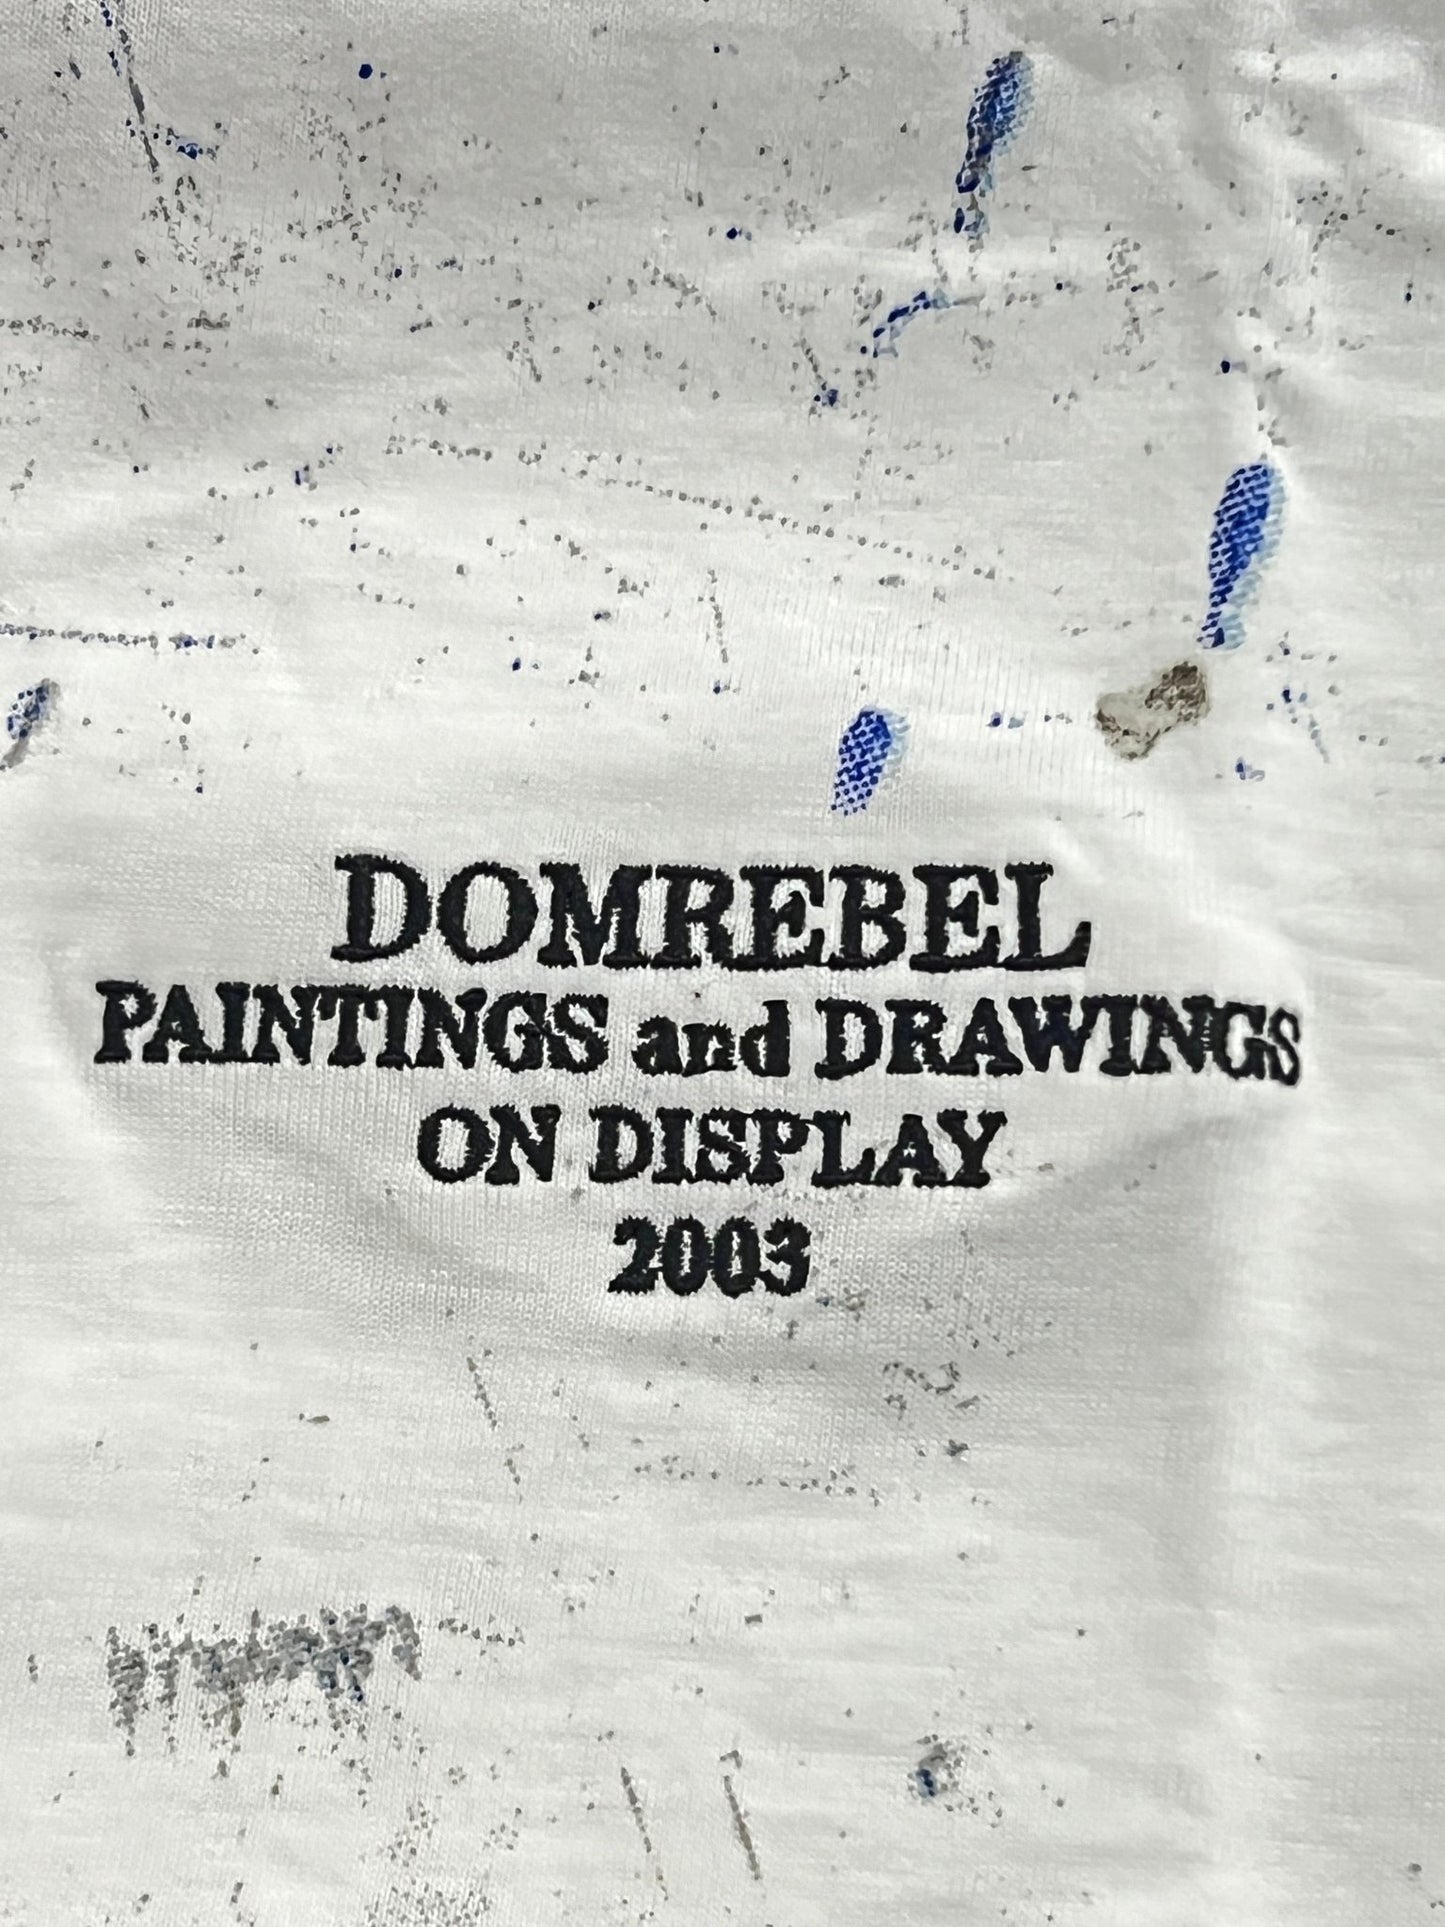 Close-up of a DOM REBEL DOMREBEL RAG T-SHIRT IVORY made from 200GSM RINGSPUN JERSEY COTTON with paint splatters, featuring black embroidered text that reads "DOMREBEL PAINTINGS and DRAWINGS ON DISPLAY 2003.